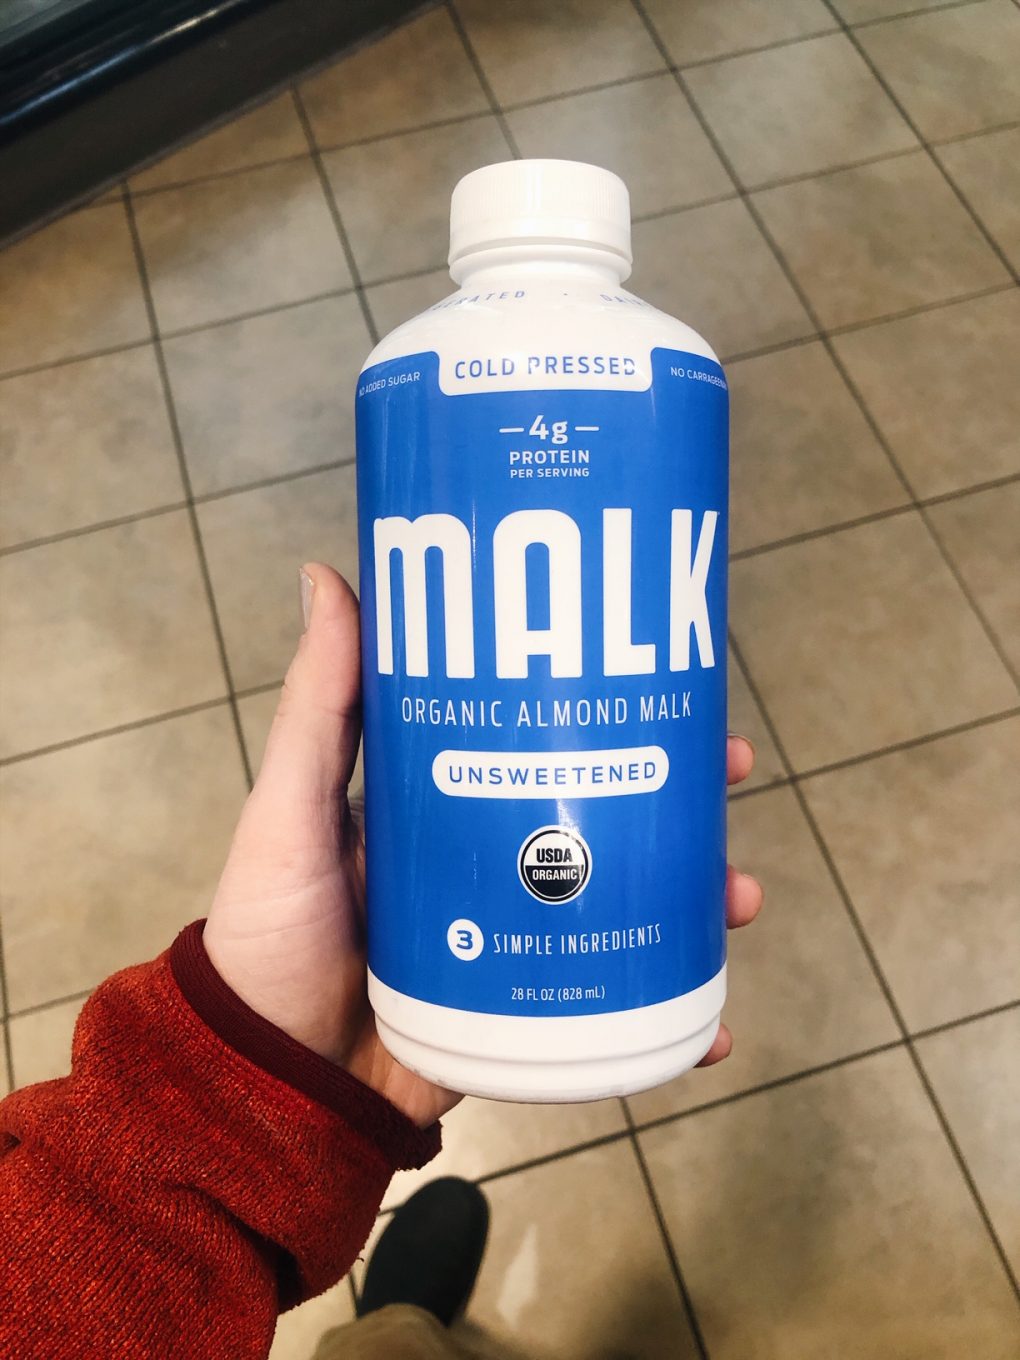 Holding a bottle of malk organics almond milk in the grocery store